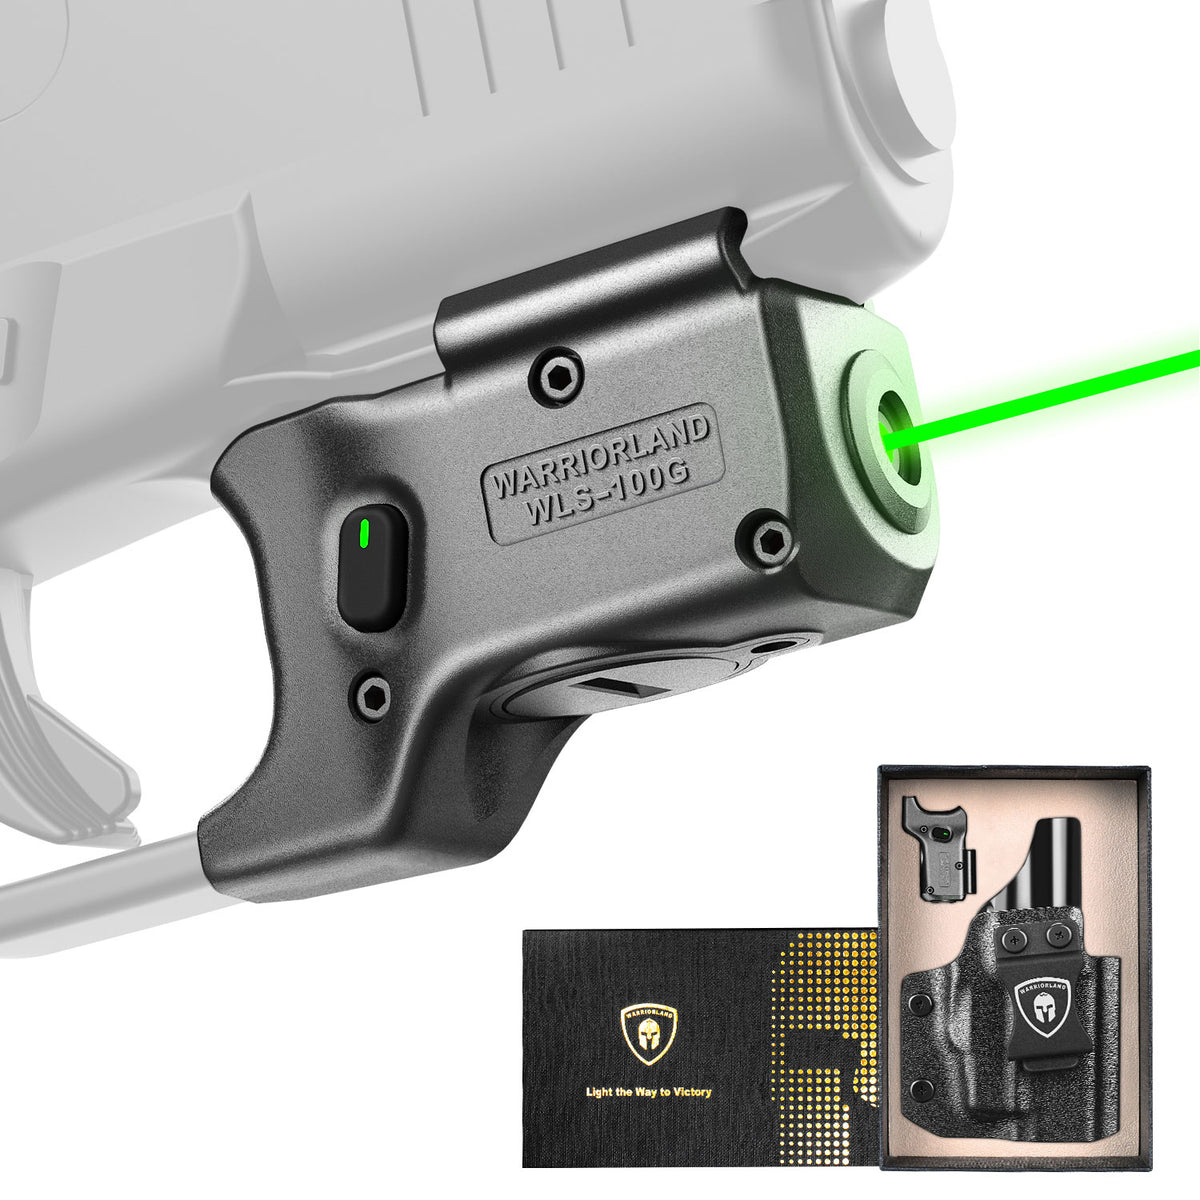 Green Laser Sight Designed to Fit Glock 43X MOS with Holster Combo, Green Beam Sight with Power Indicator, Custom-Made IWB Kydex Right Hand Holster, WLS-100G w/ G43X MOS Holster|WARRIORLAND